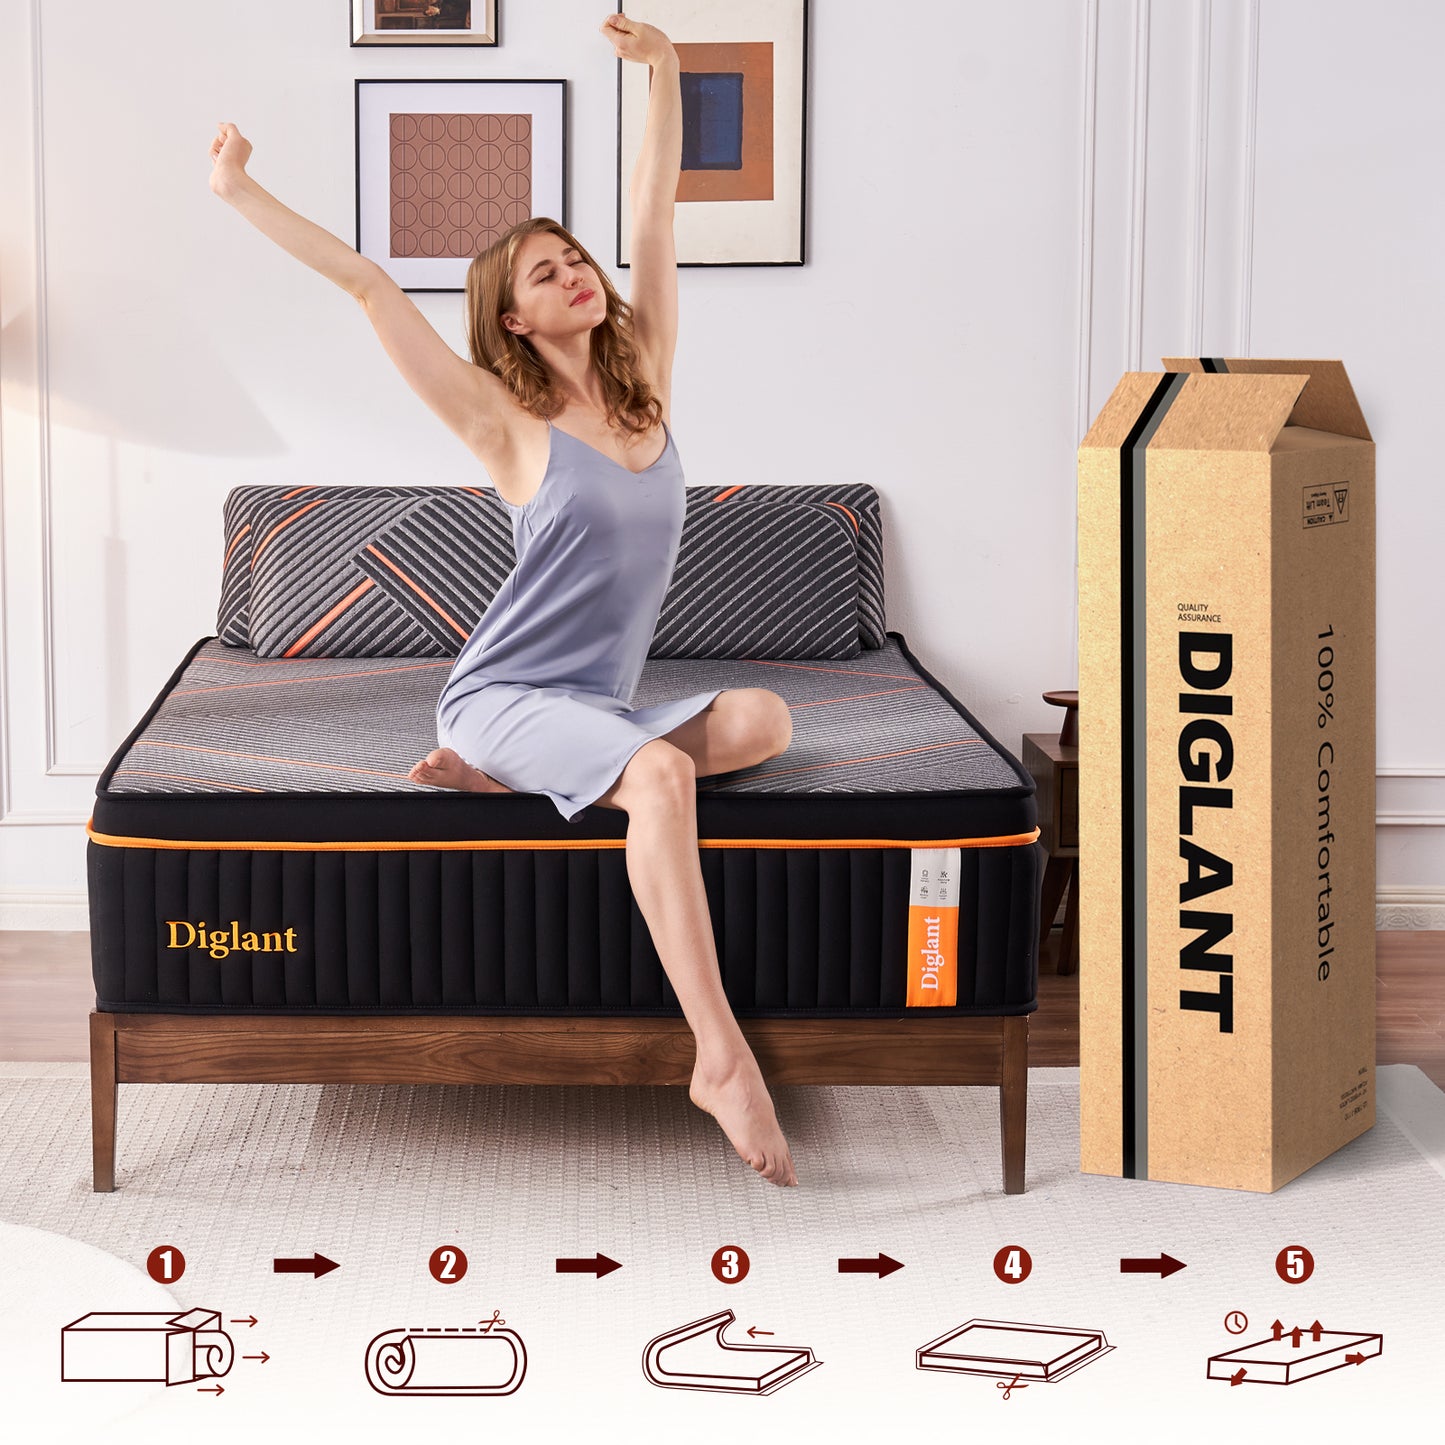 DIGLANT 14Inch Plush Memory Foam Hybrid Mattress, Cal King Size Mattress in Box with Individual Pocket Spring, Black Soft Mattress for Pressure Relief,CertiPUR-US